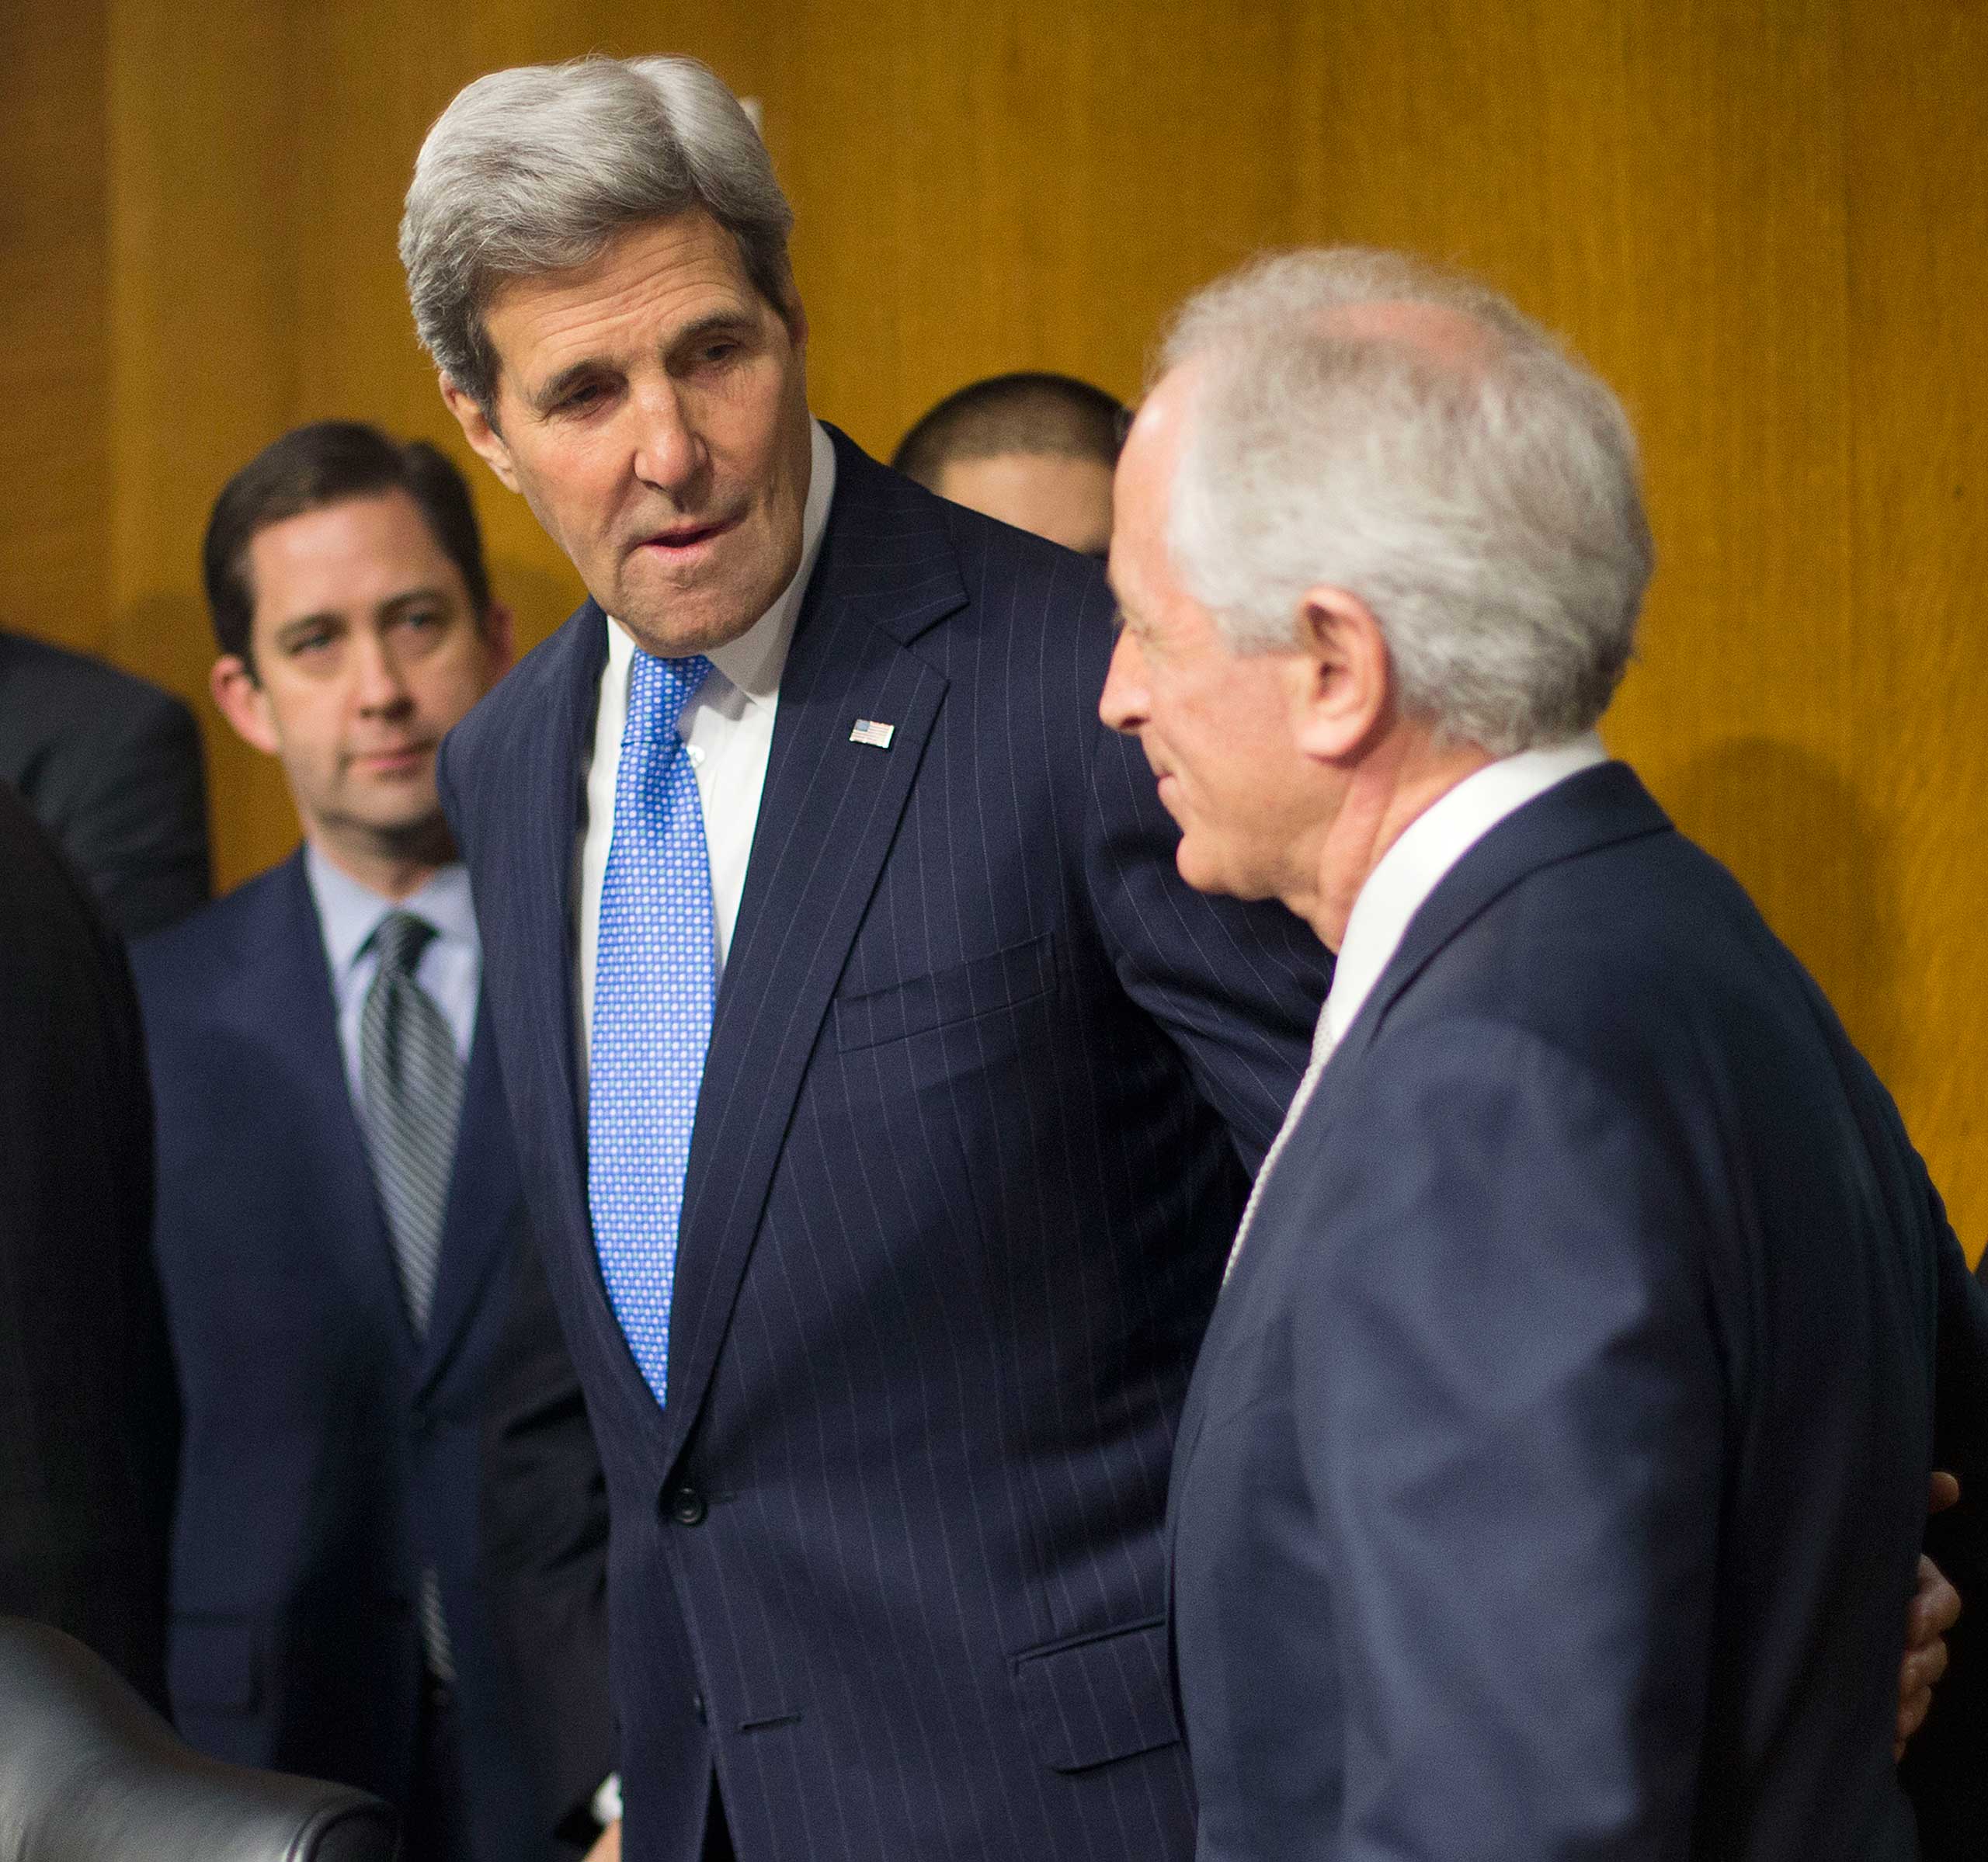 Senate Foreign Relations Committee Chairman Sen. Bob Corker, R-Tenn., right, greets  Secretary of State John Kerry on Capitol Hill in Washington, Wednesday, March 11, 2015, prior to Kerry's testimony before the committee. (Pablo Martinez Monsivais—AP)